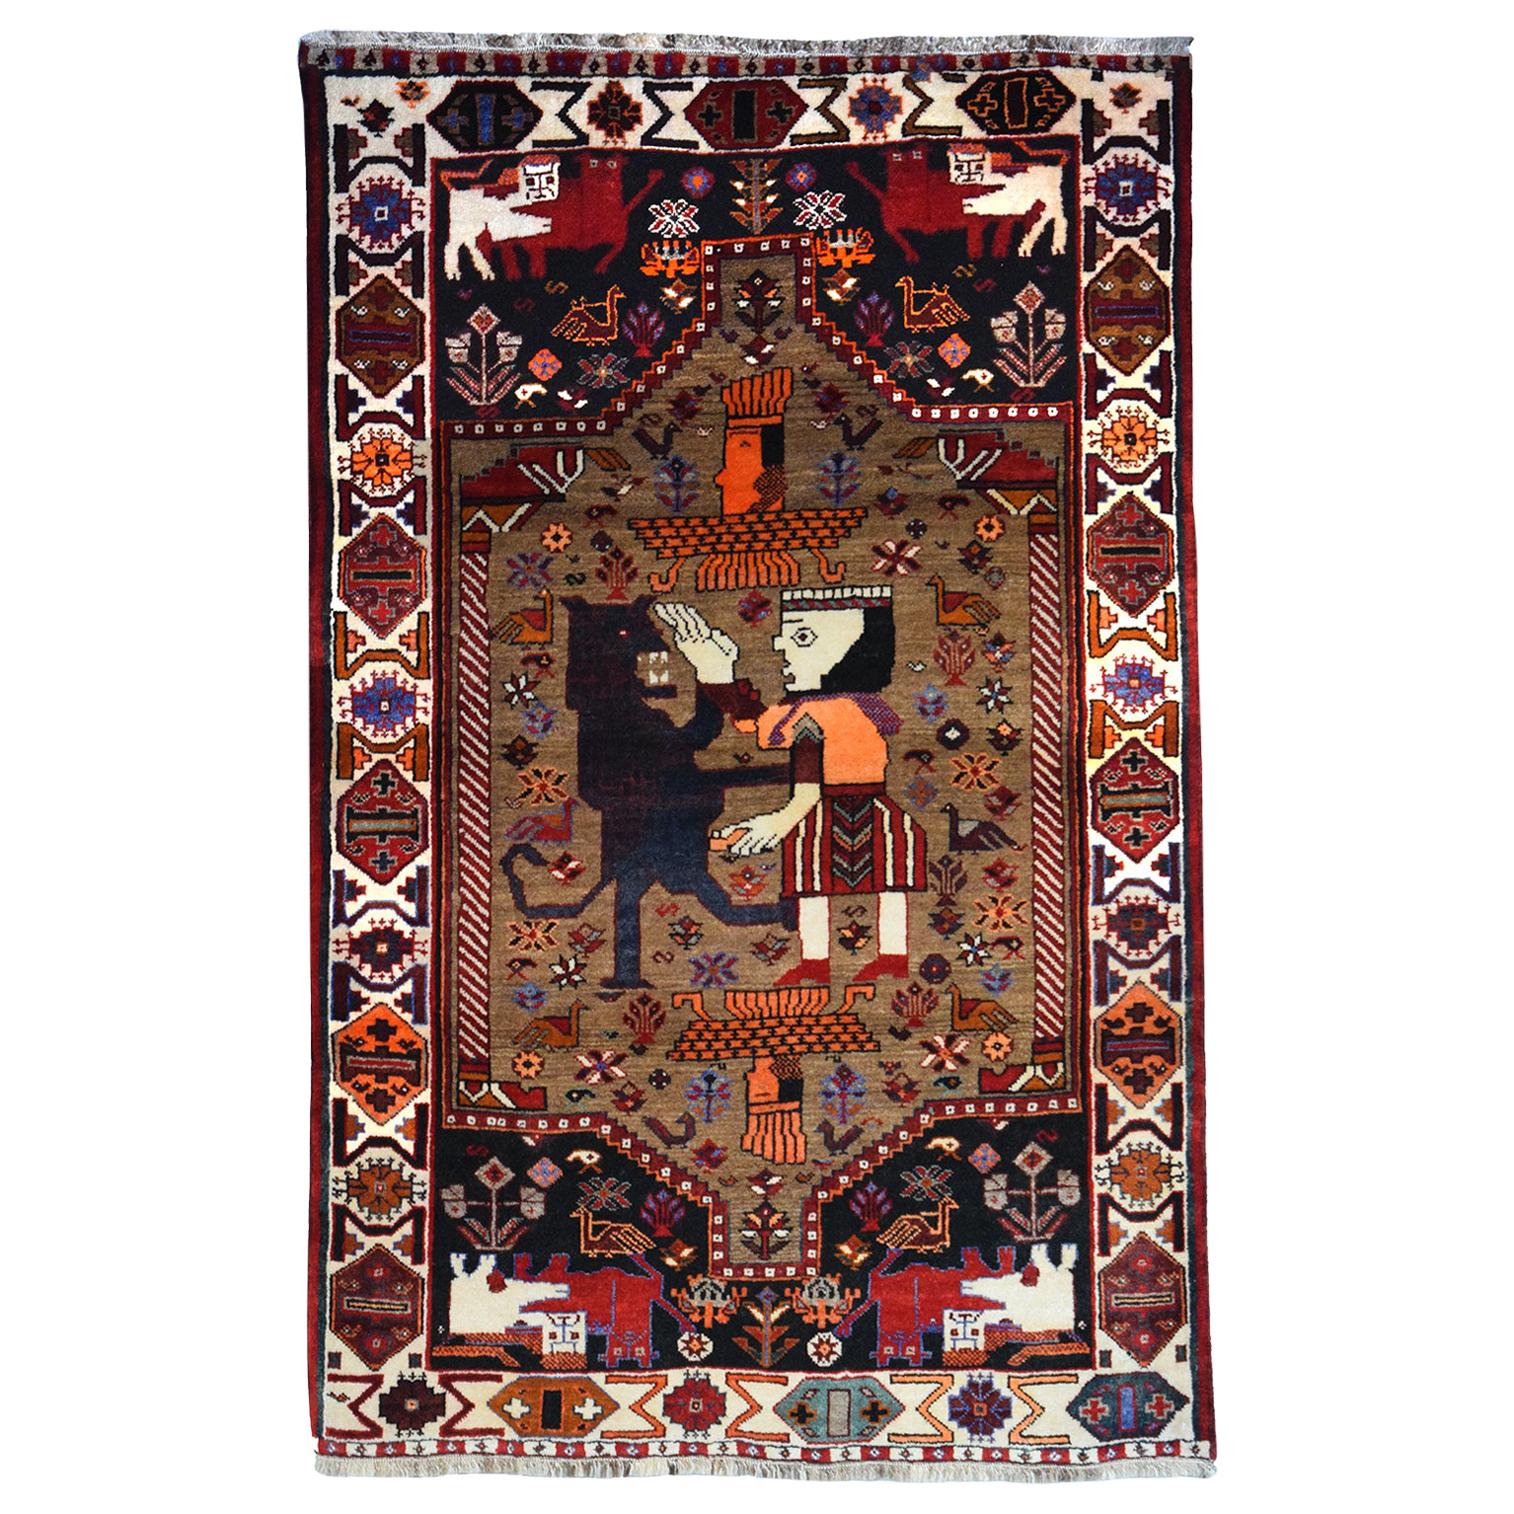 Antique 1940s Persian Qashqai Rug, King Bahram and the Lion, 3' x 5'